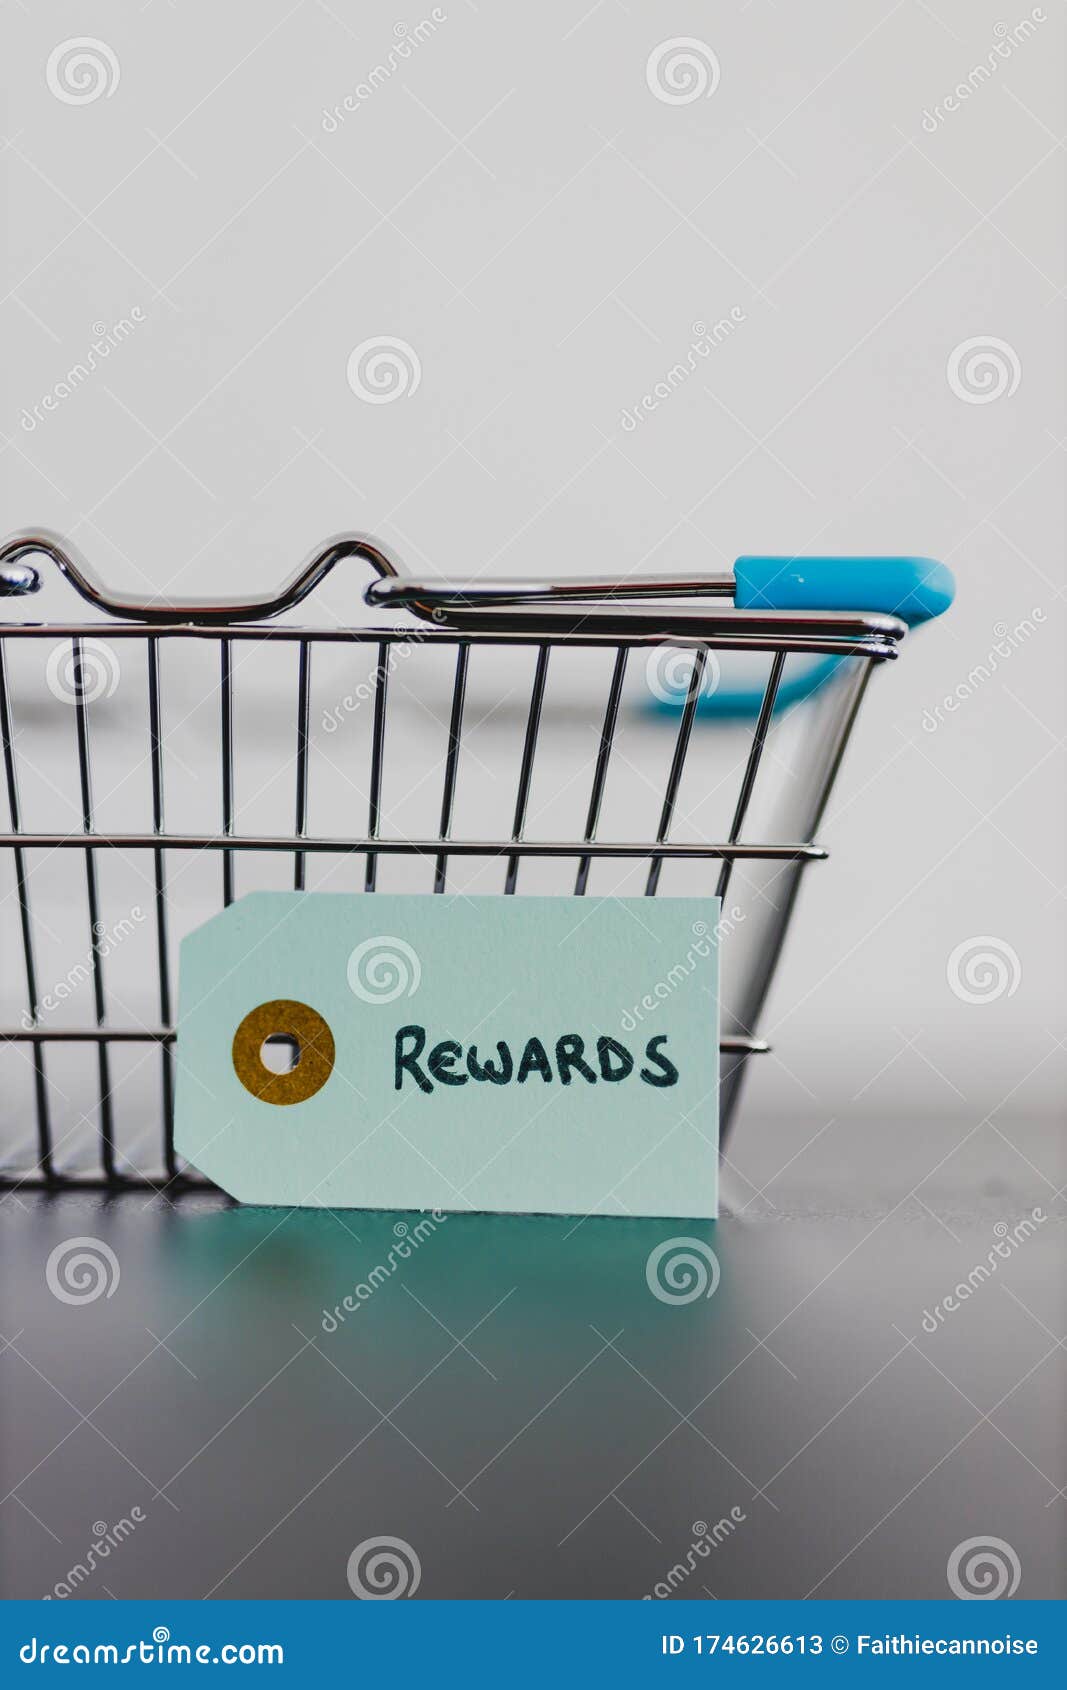 Customer Rewards And Fidelization Incentives Shopping Basket With